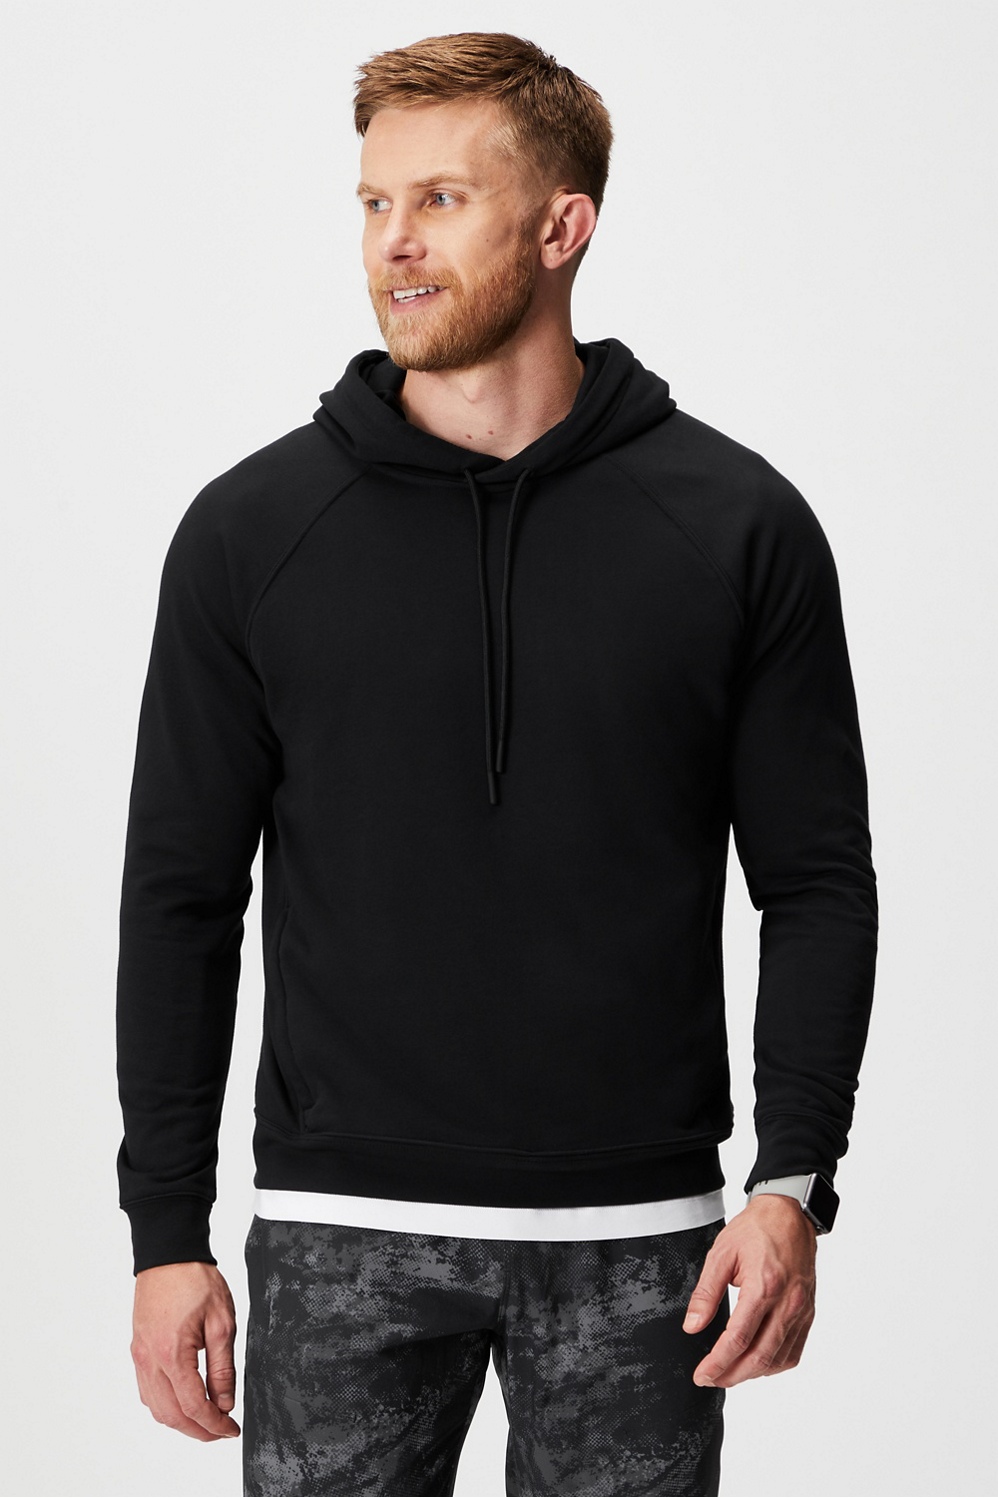 The Go-To Hoodie - Fabletics